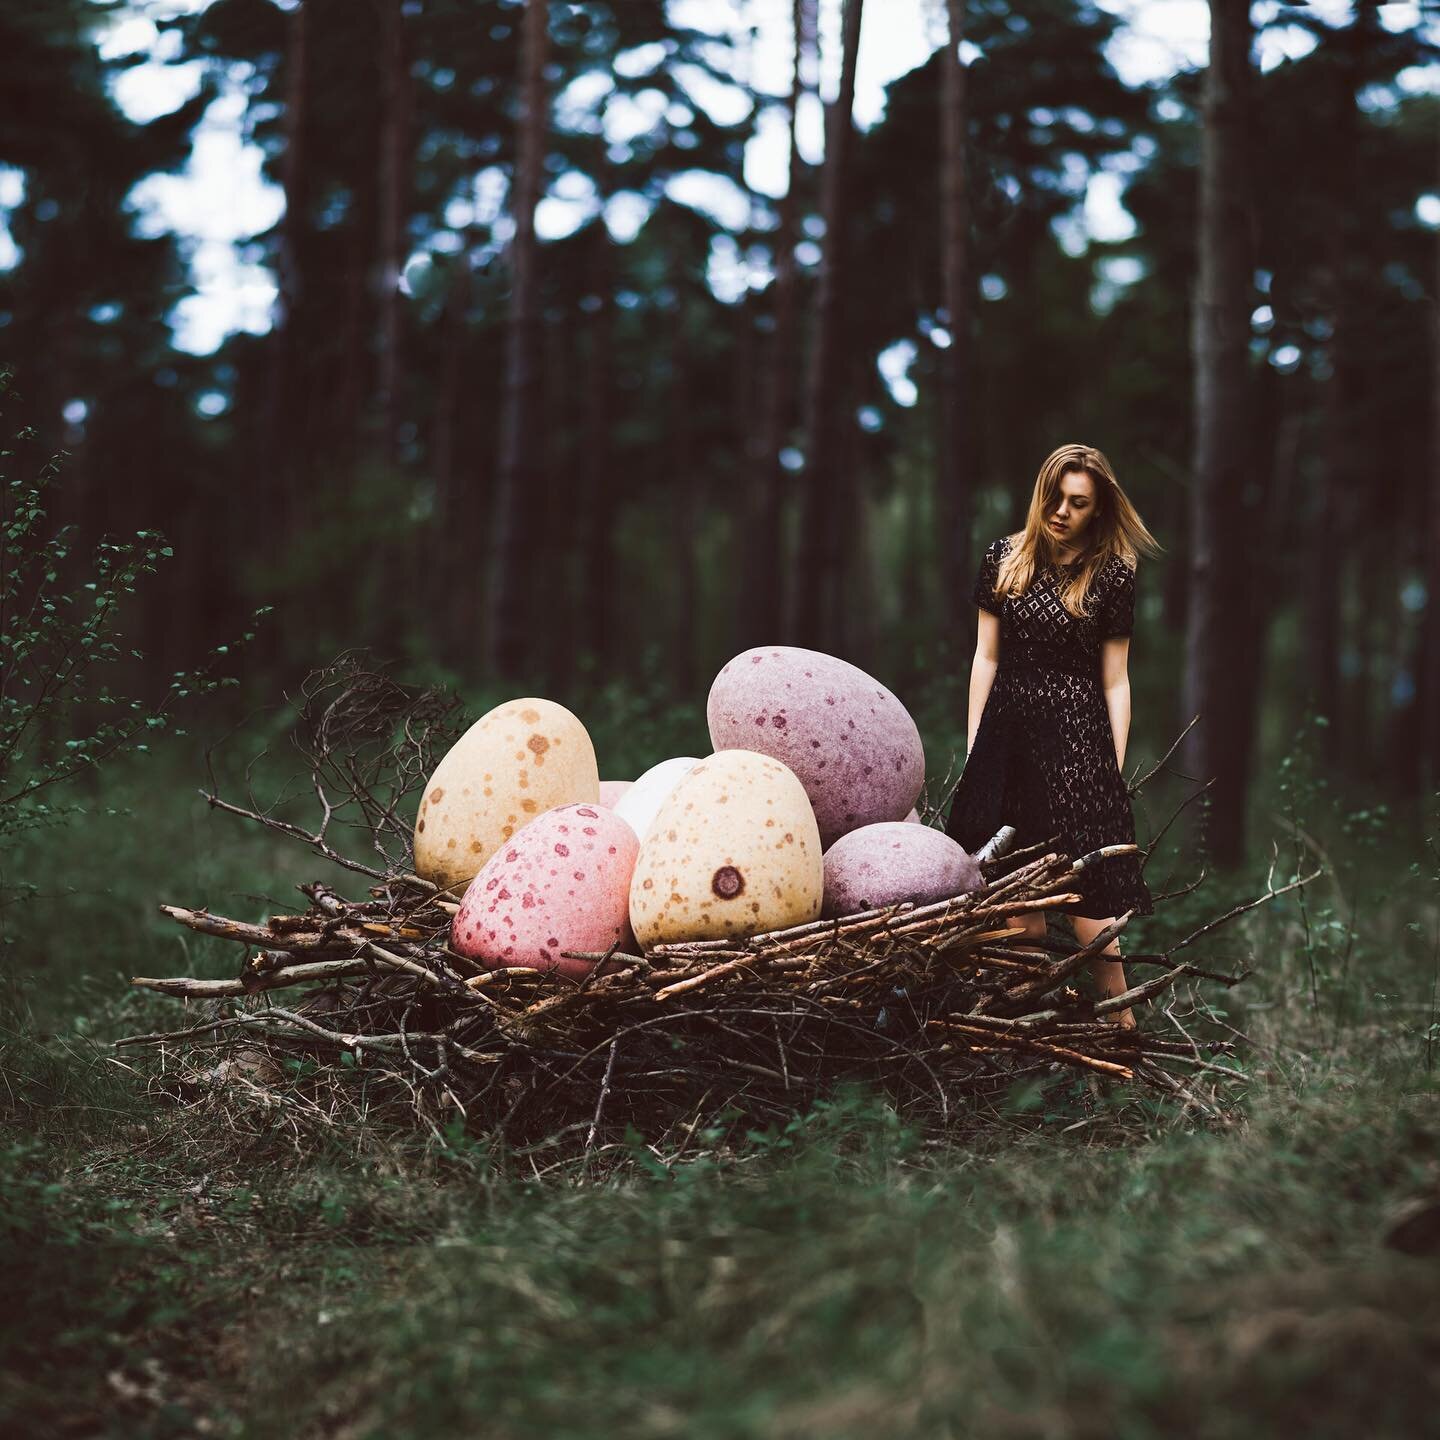 Happy Easter! 🐣 hope everyone is staying safe, enjoying this lovely weather and eating lots of chocolate! ⠀⠀⠀⠀⠀⠀⠀
&mdash;⠀⠀⠀⠀⠀⠀⠀
#surrealphotography #happyeaster #fineartphotography #cadburyminieggs #minieggs #laurawilliamsphotography #stayinside